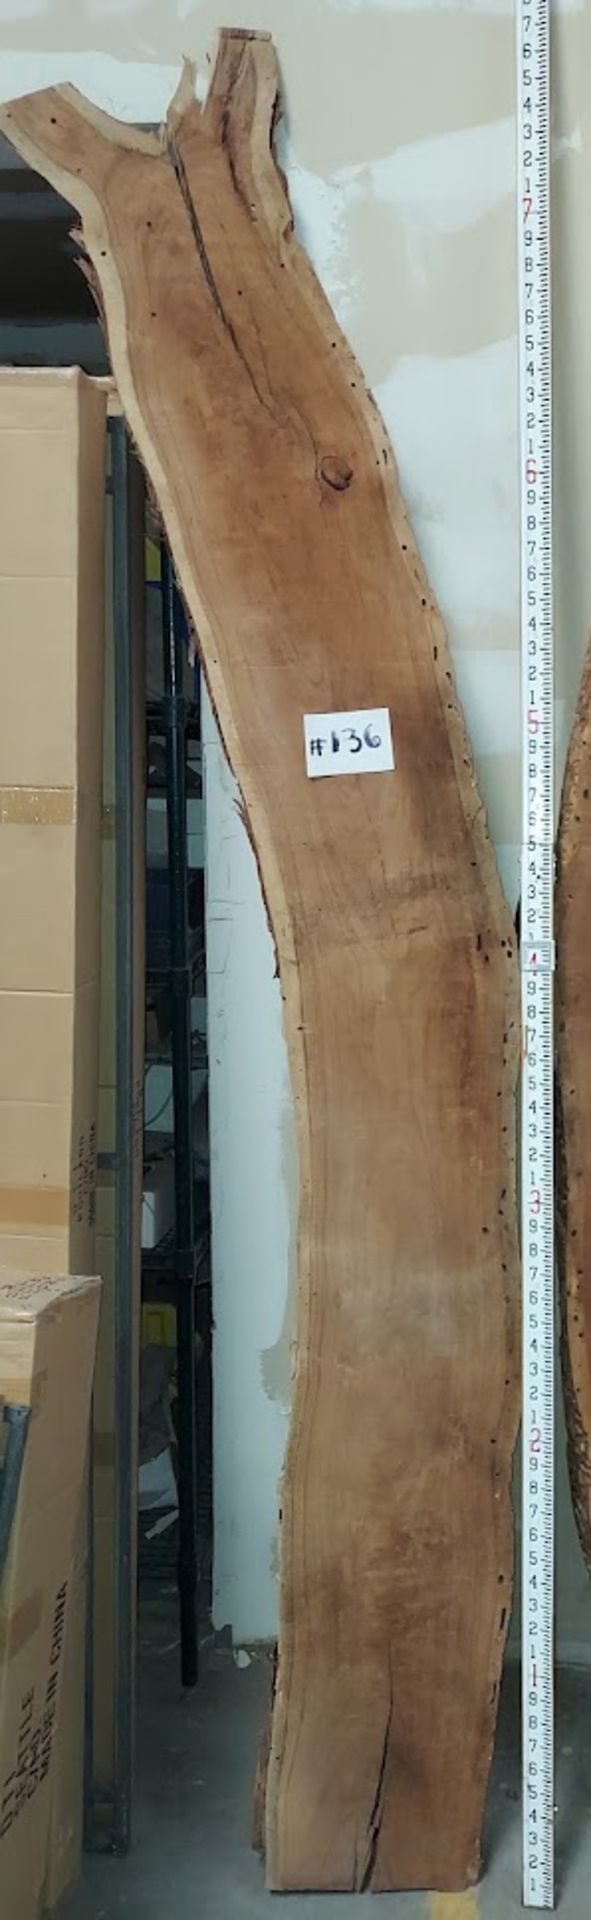 Mesquite Hardwood Lumber Slab, Size is approx. 93" x 10" - 12" x 2" Thick (Book Matched 137)